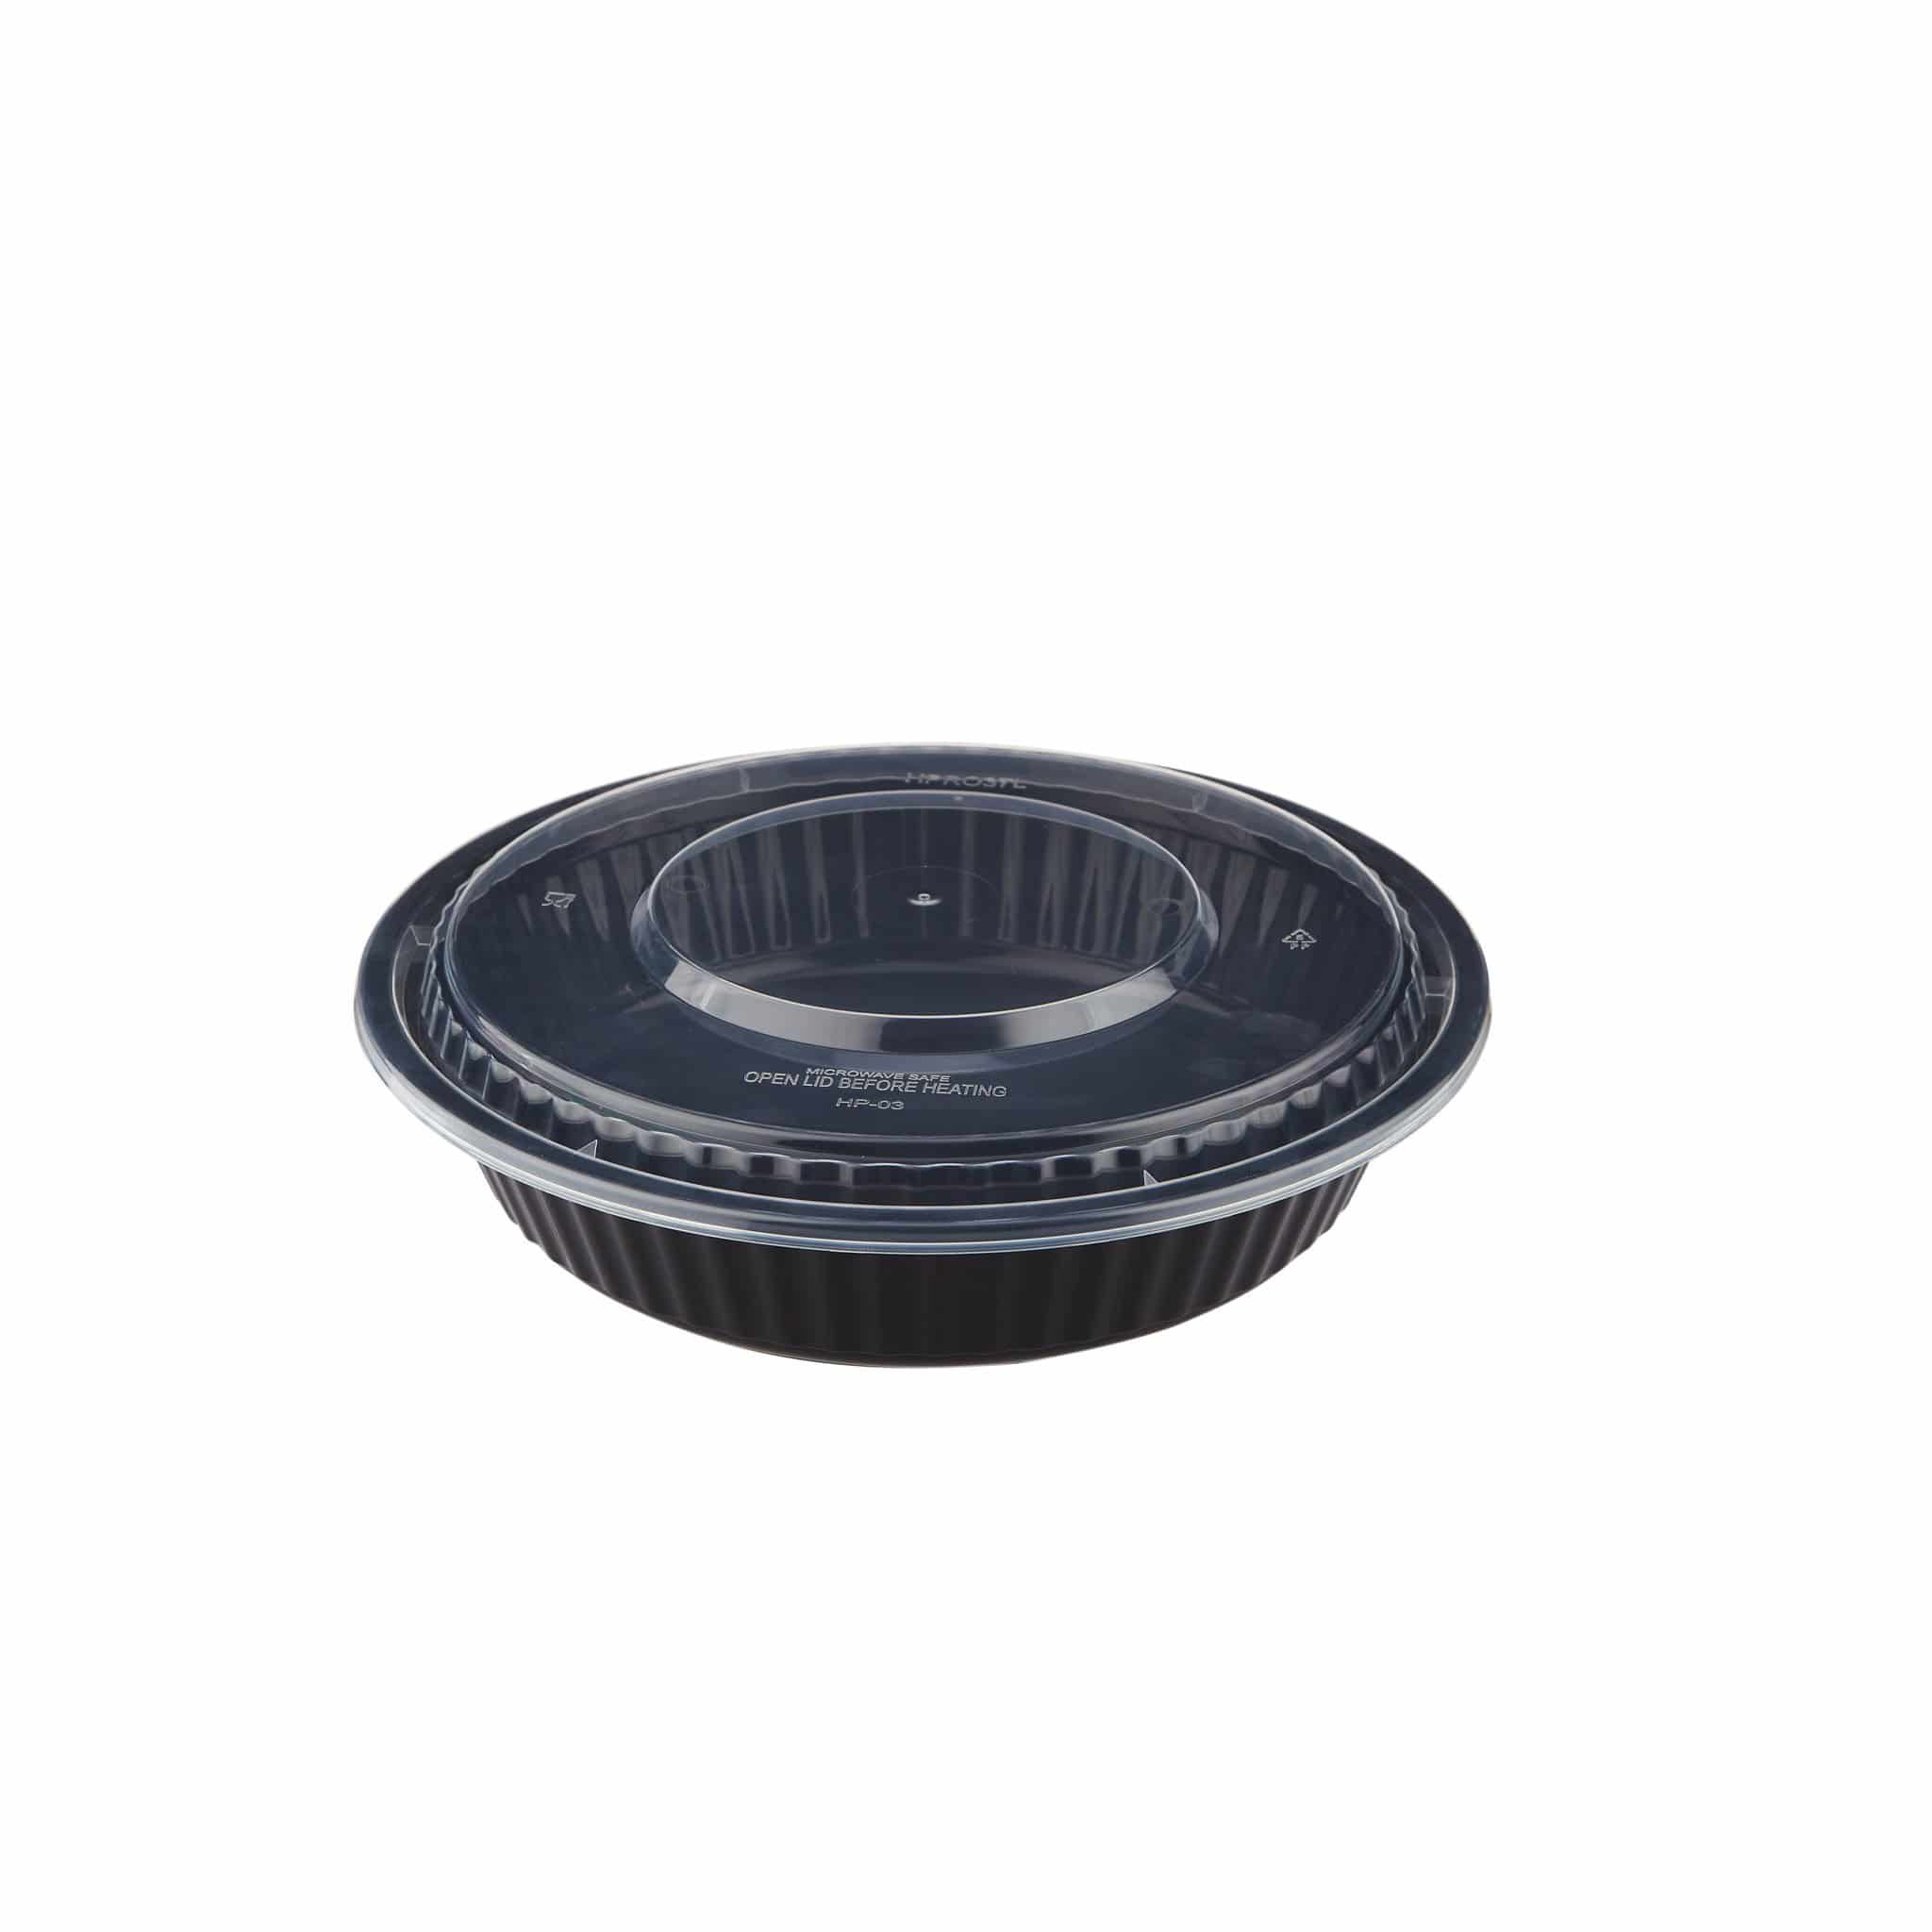 Black Base Heavy Duty Round Container 37 Oz 300 Pieces - Hotpack Global